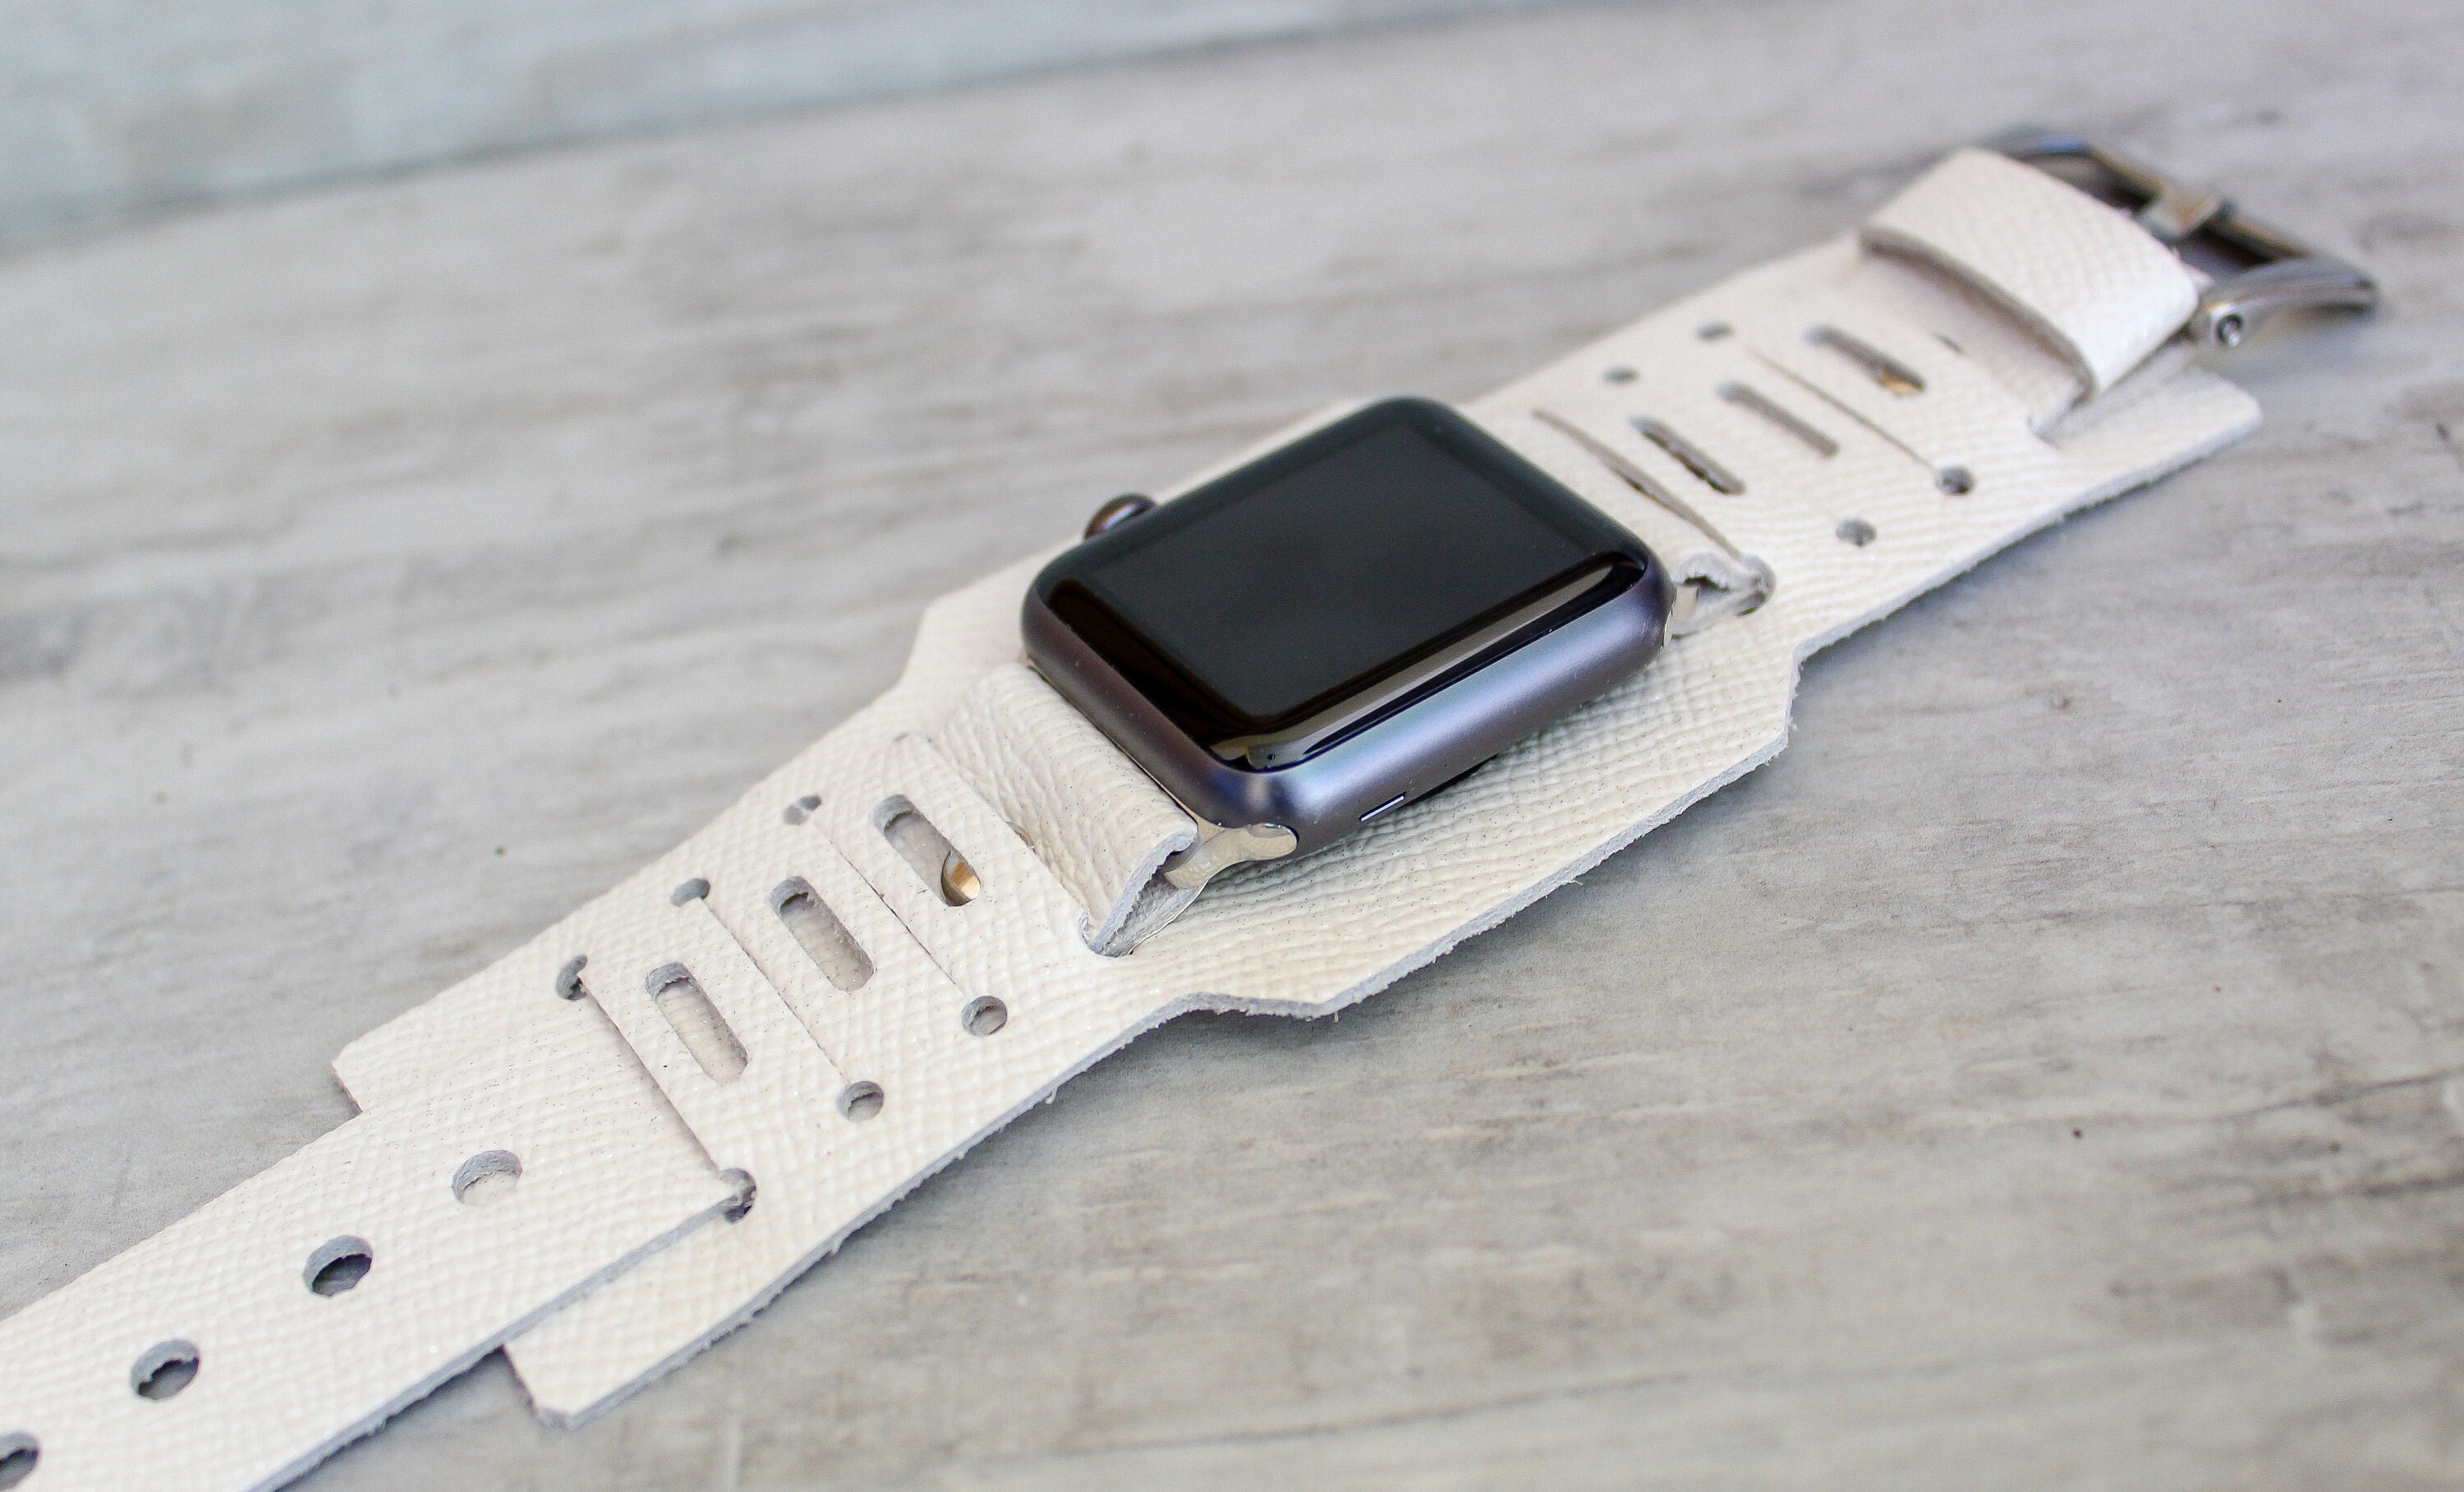 lv white apple watch band